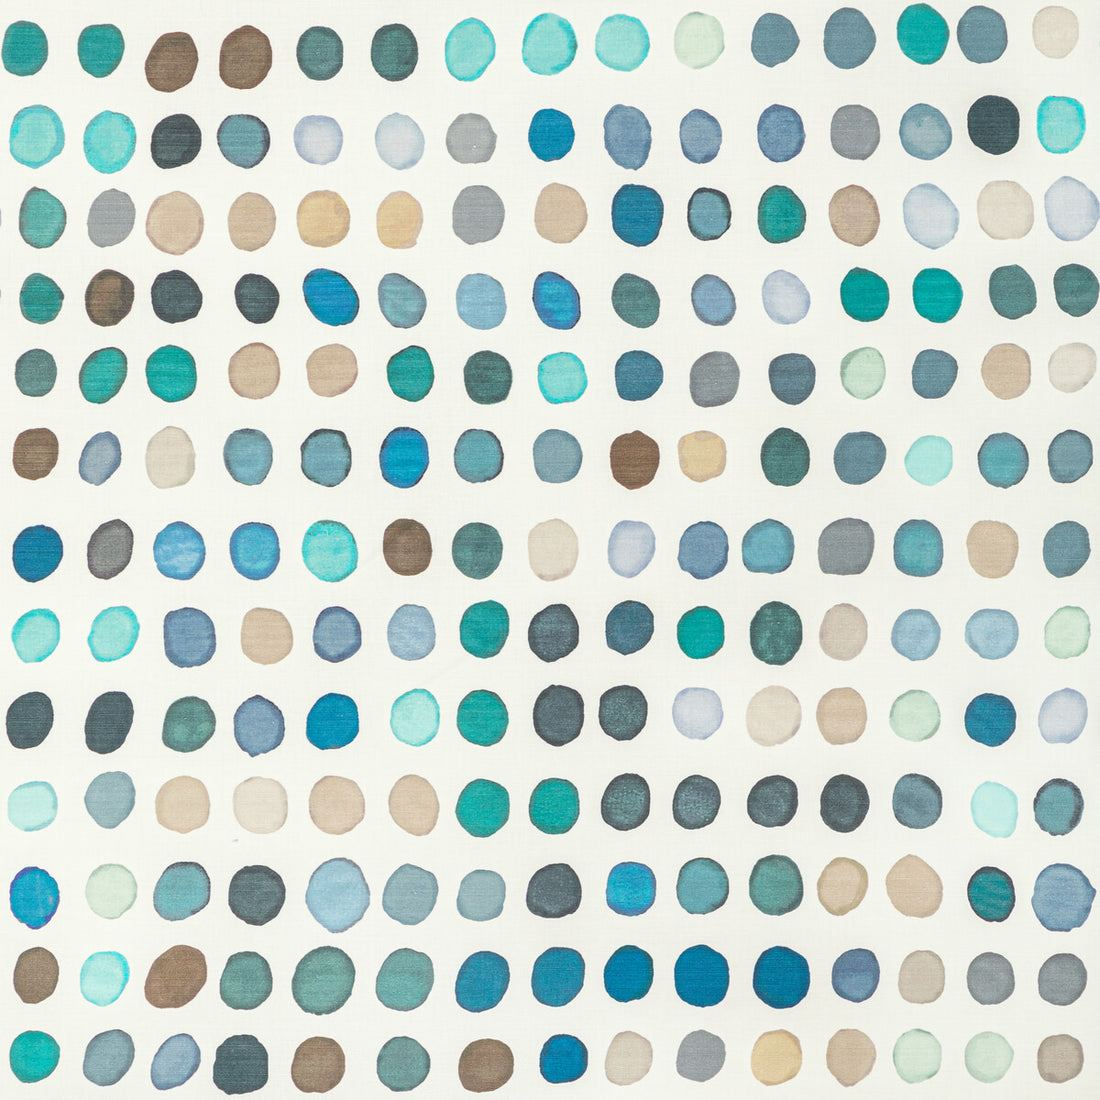 Twister Print fabric in denim/aqua color - pattern GWF-2735.355.0 - by Lee Jofa Modern in the Rhapsody collection